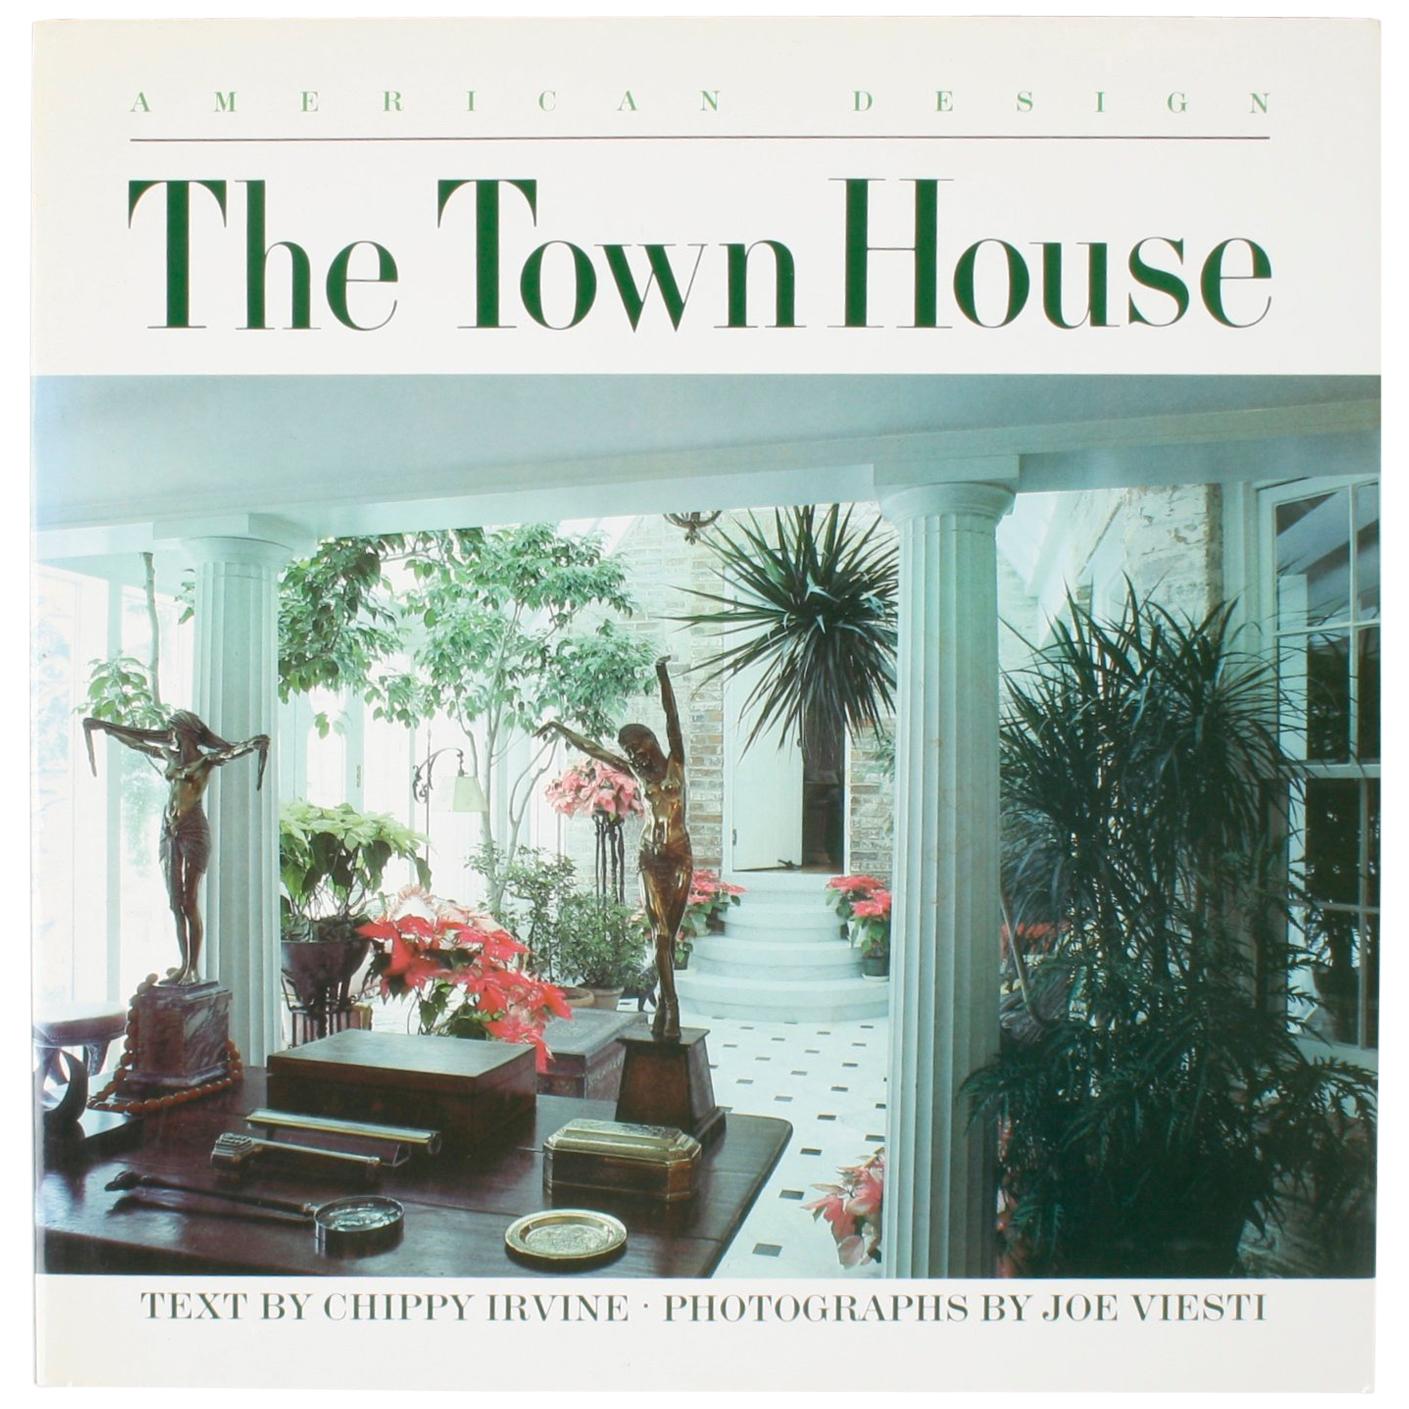 “The Town House” American Design Series by Chippy Irvine, First Edition